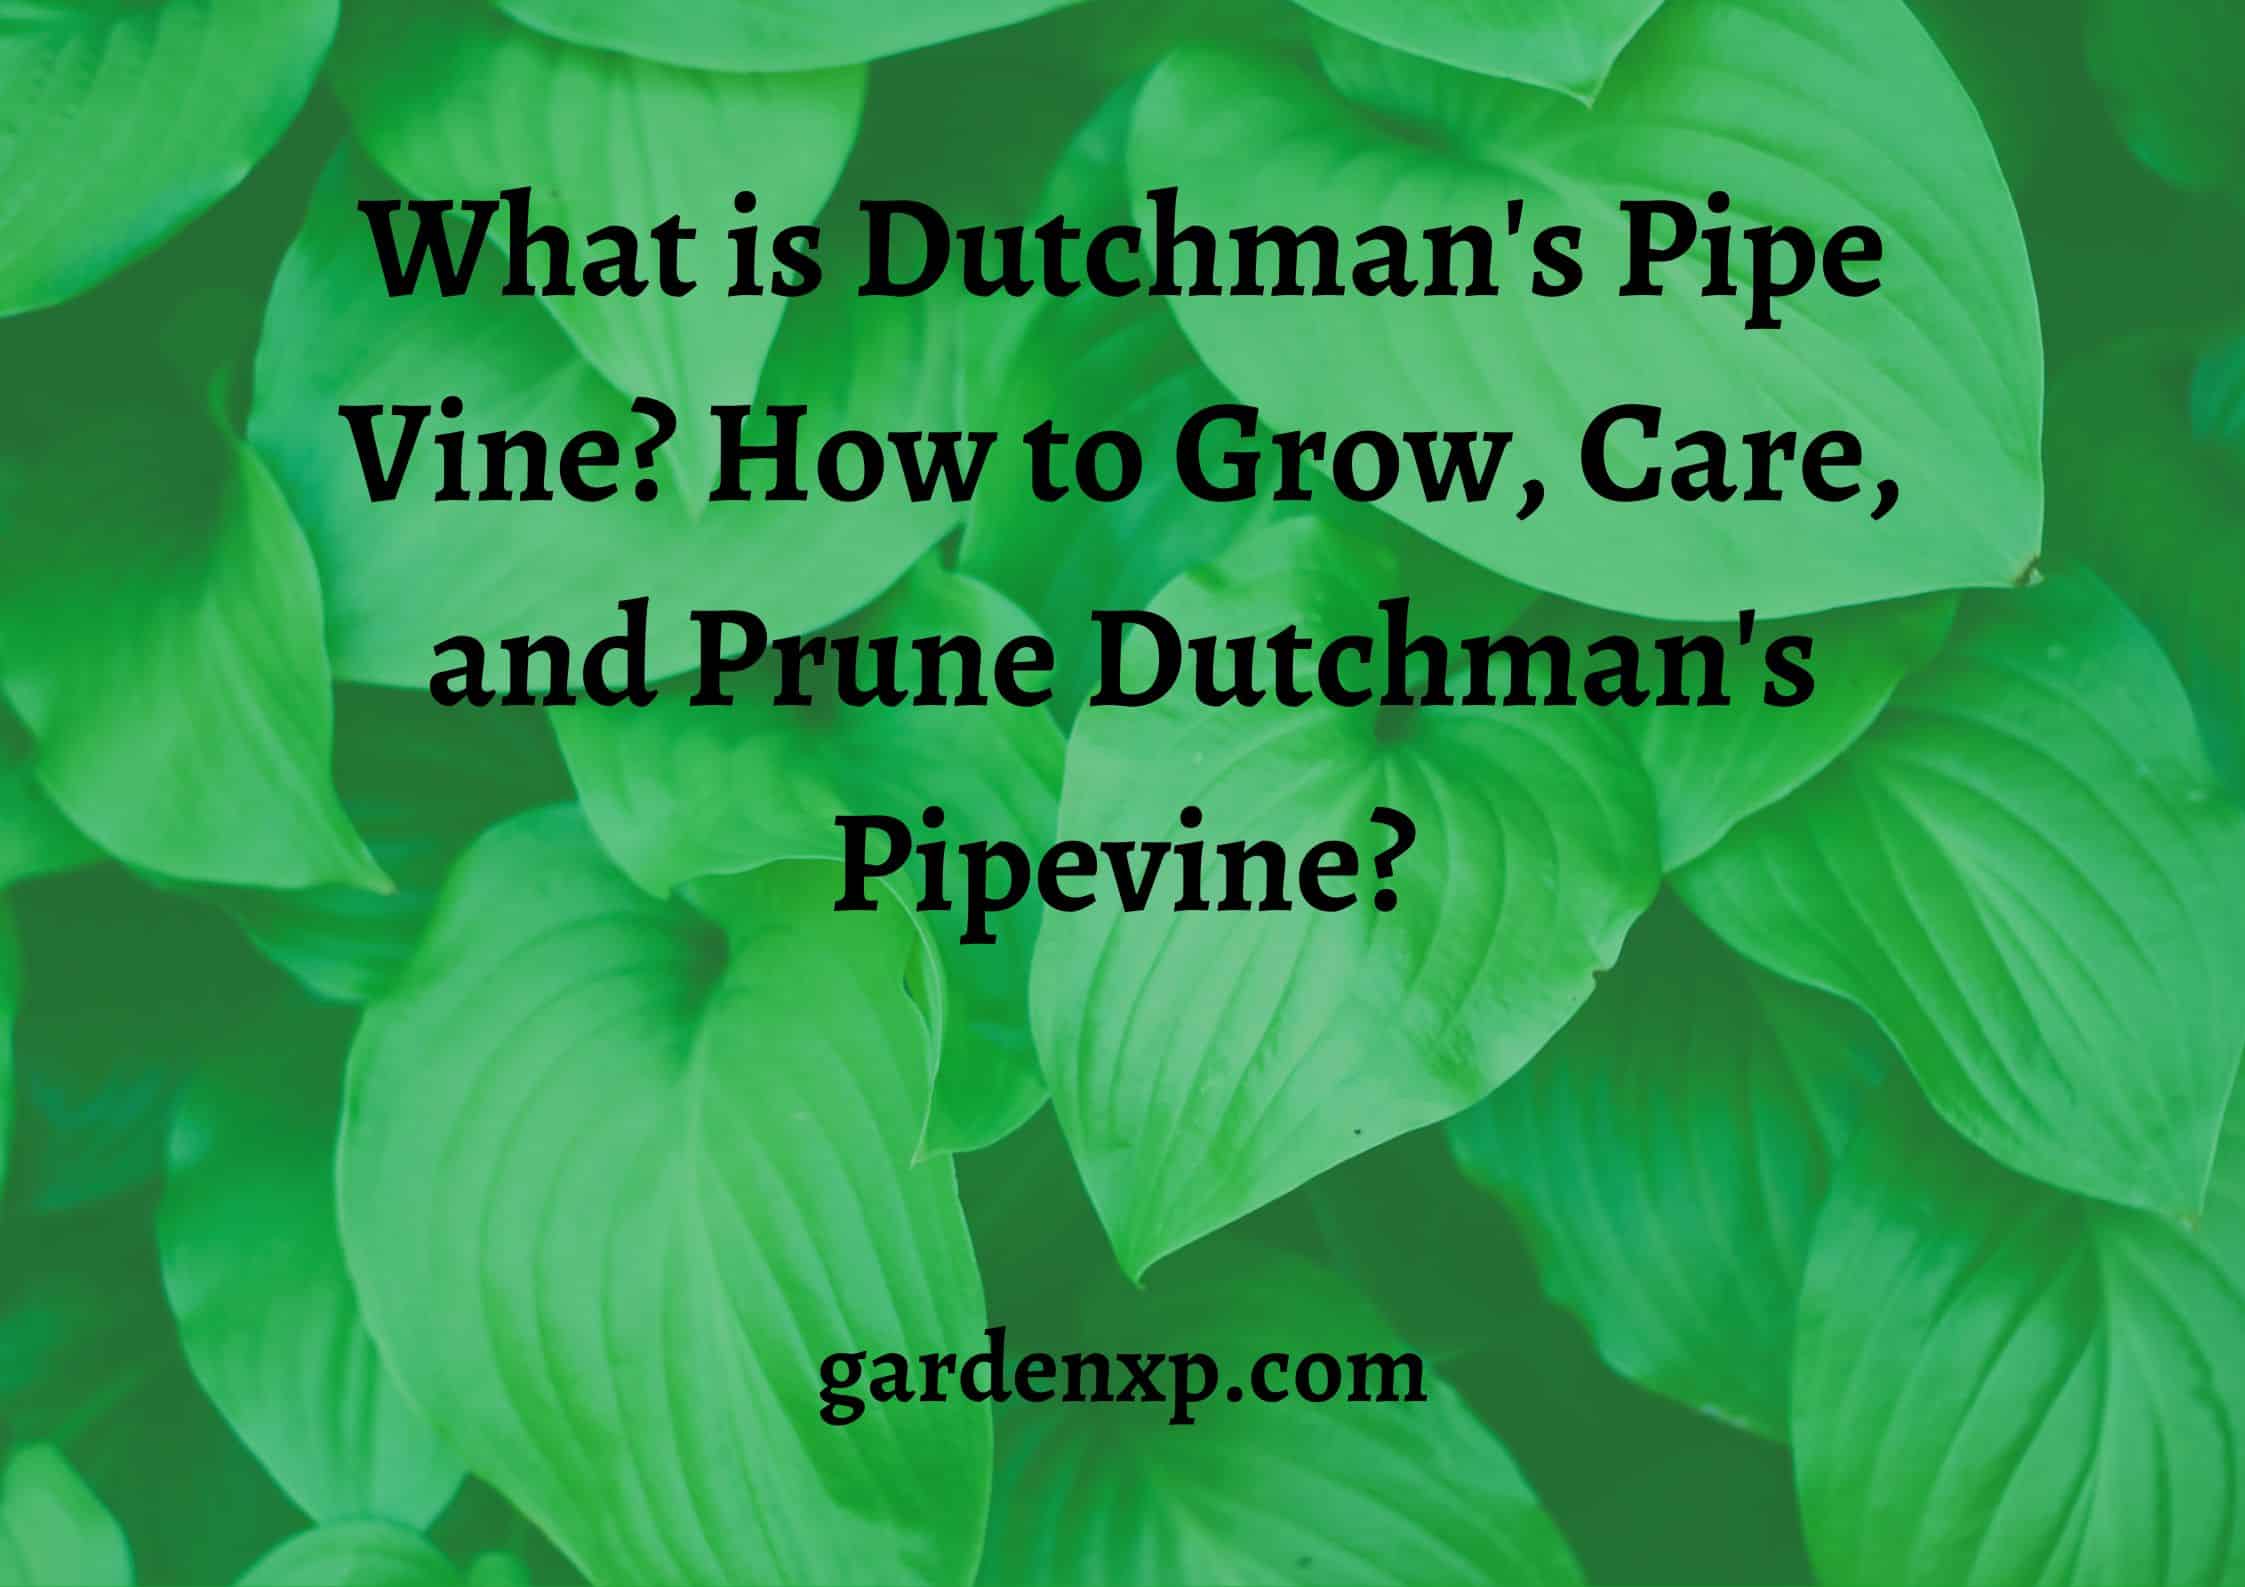 What is Dutchman's Pipe Vine? How to Grow Care and Prune Dutchman's Pipevine?